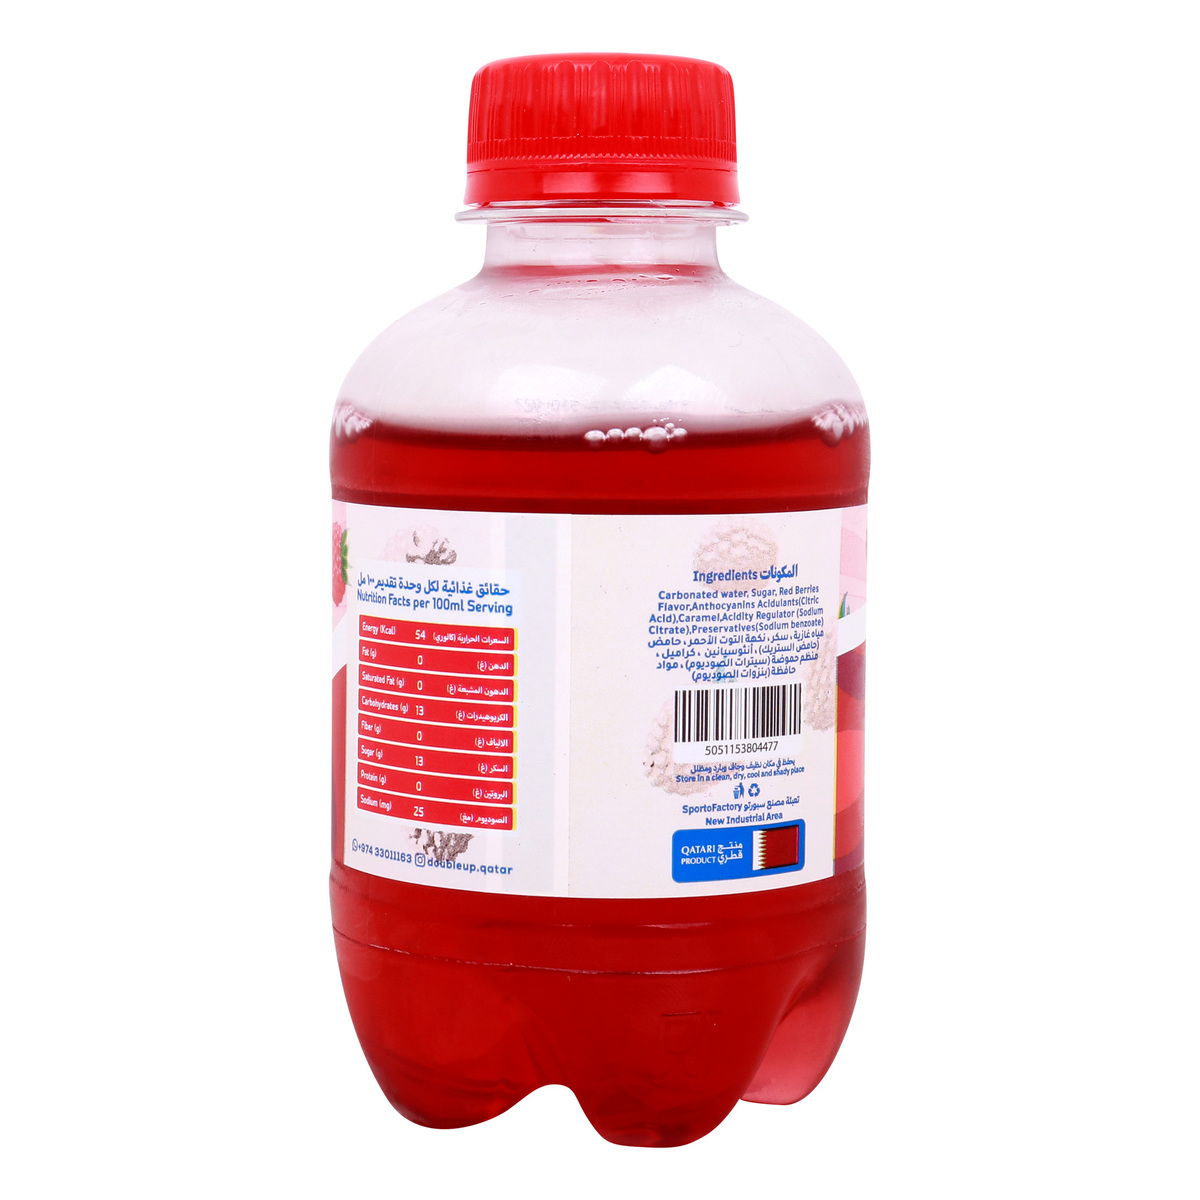 Double Up Carbonated Drink Red Berries Pet Bottle 200 ml